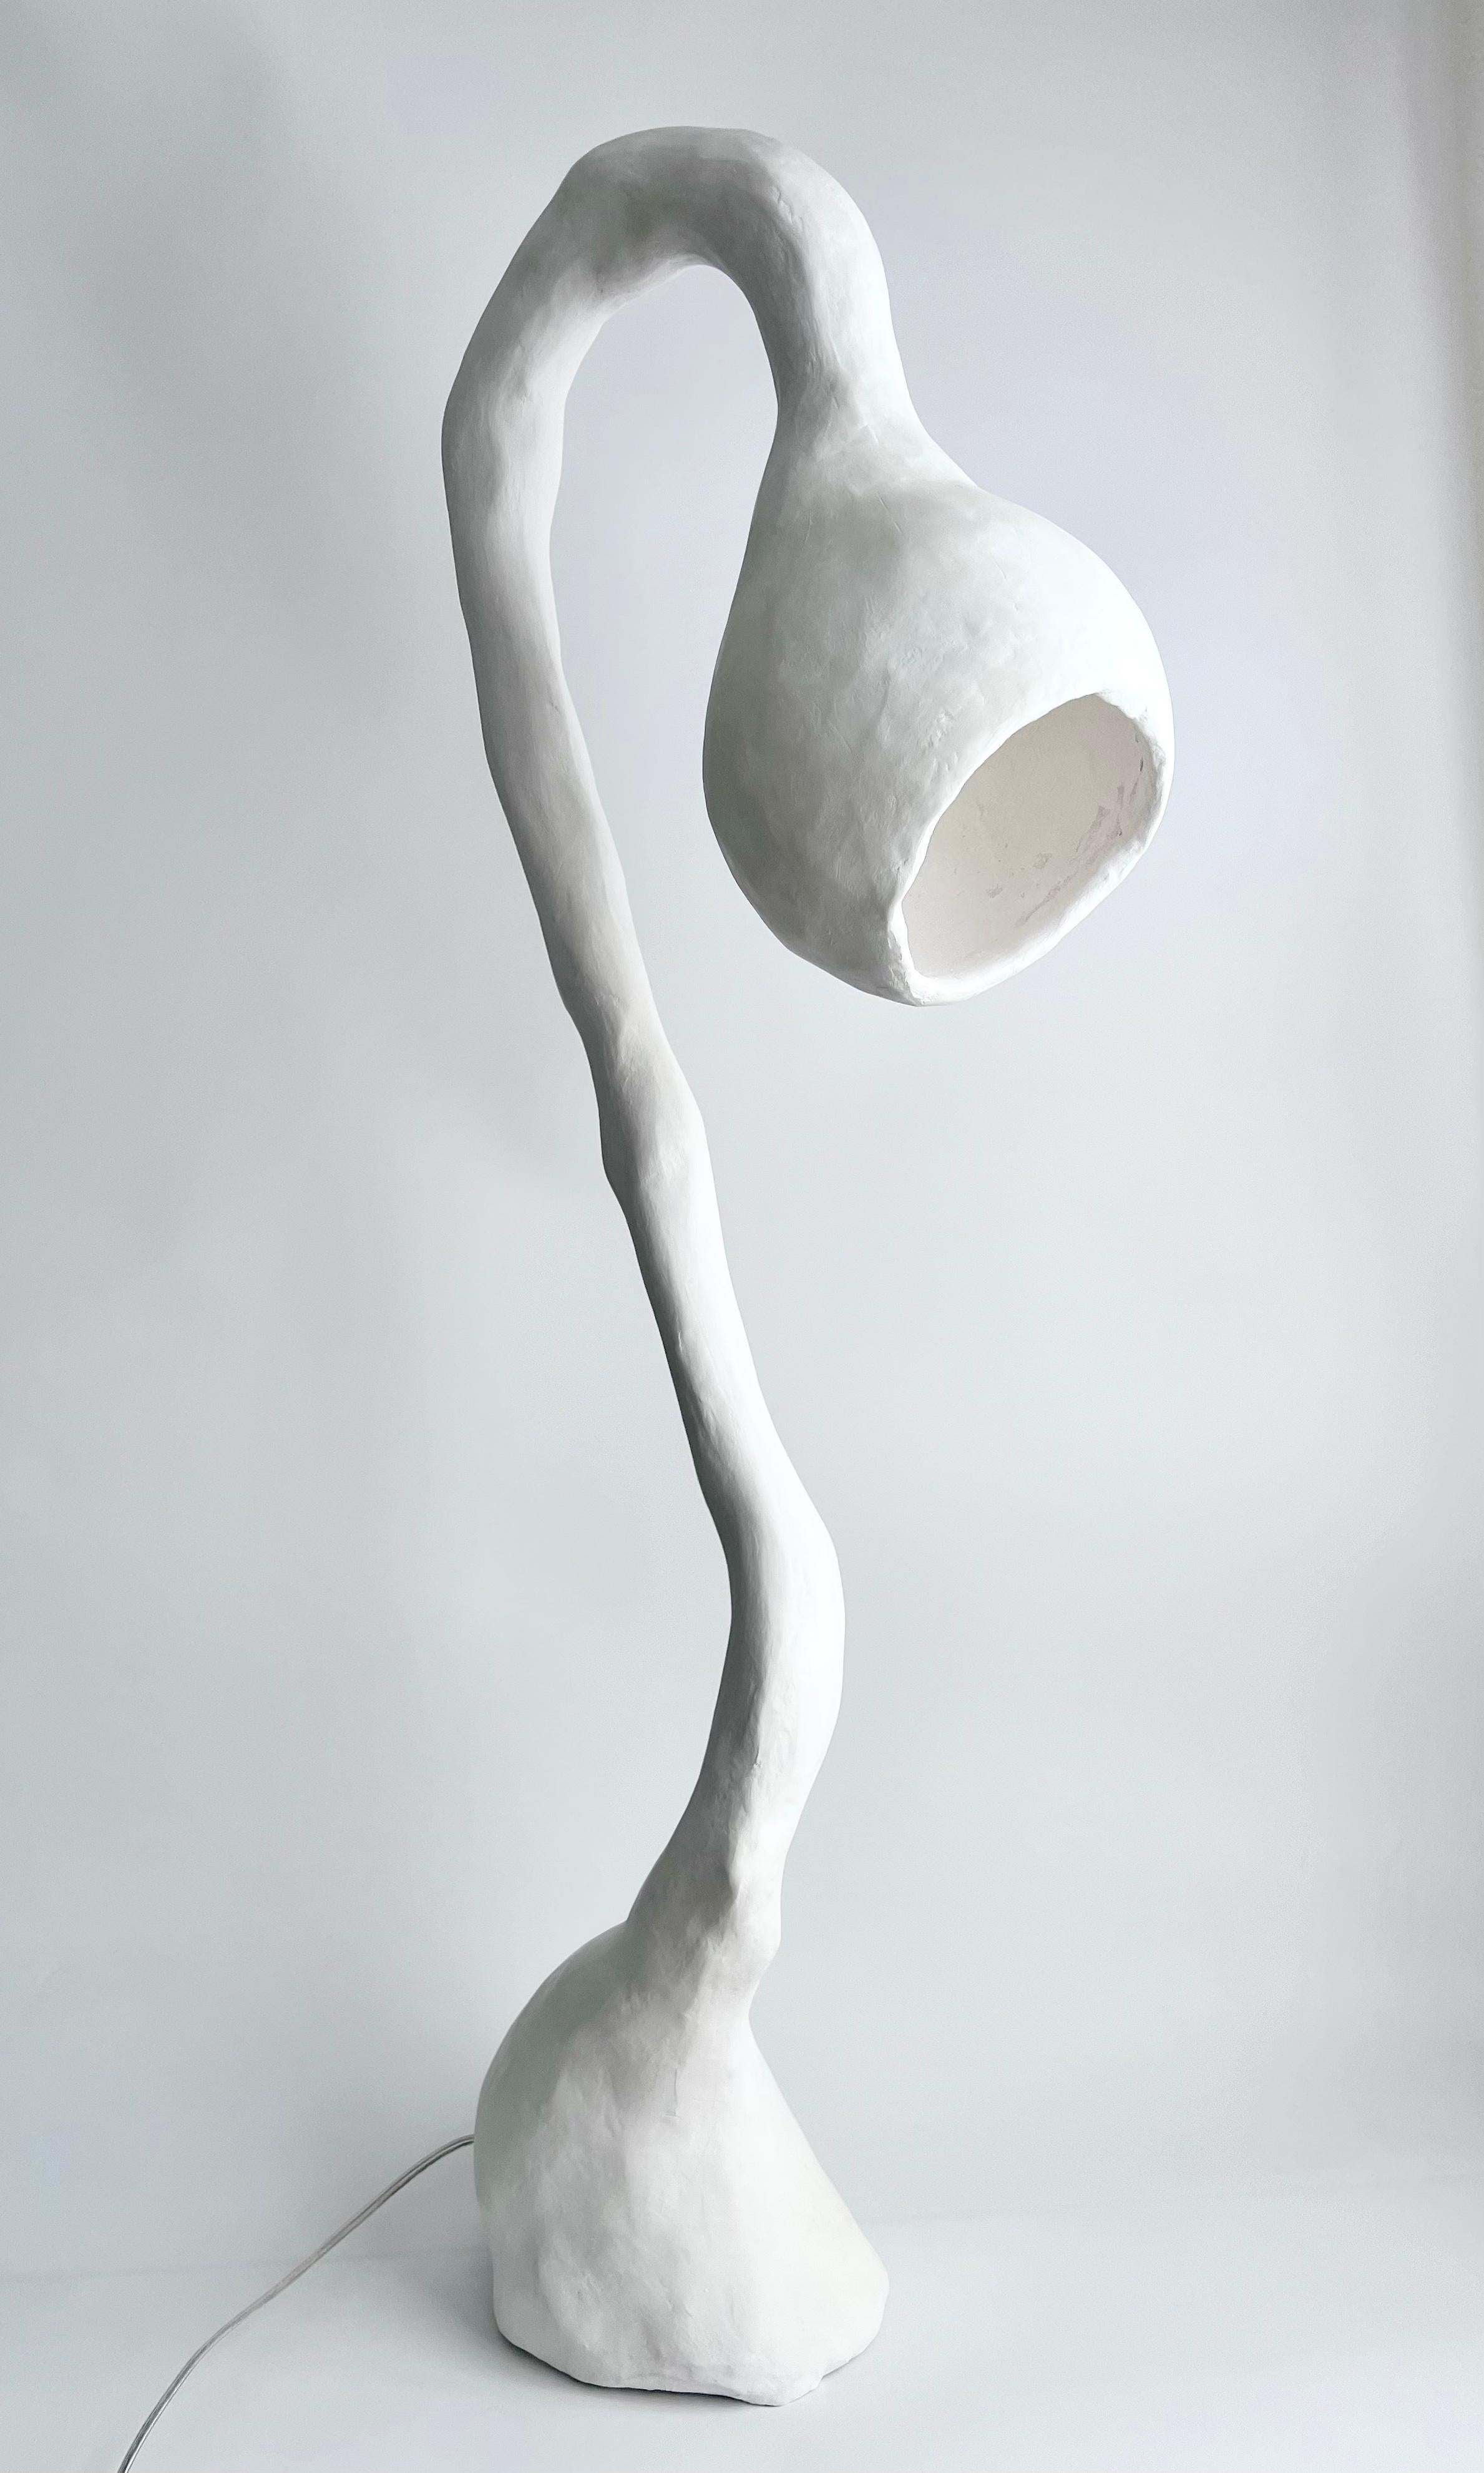 Custom Floor Lamp Design by Studio Chora, Biomorphic Series, current production and made-to-order. 7-8 week lead time. 
Biomorphic: ‘bios' meaning life and 'morphe' meaning form.

Reach out to seller/maker for finish samples, this light fixture